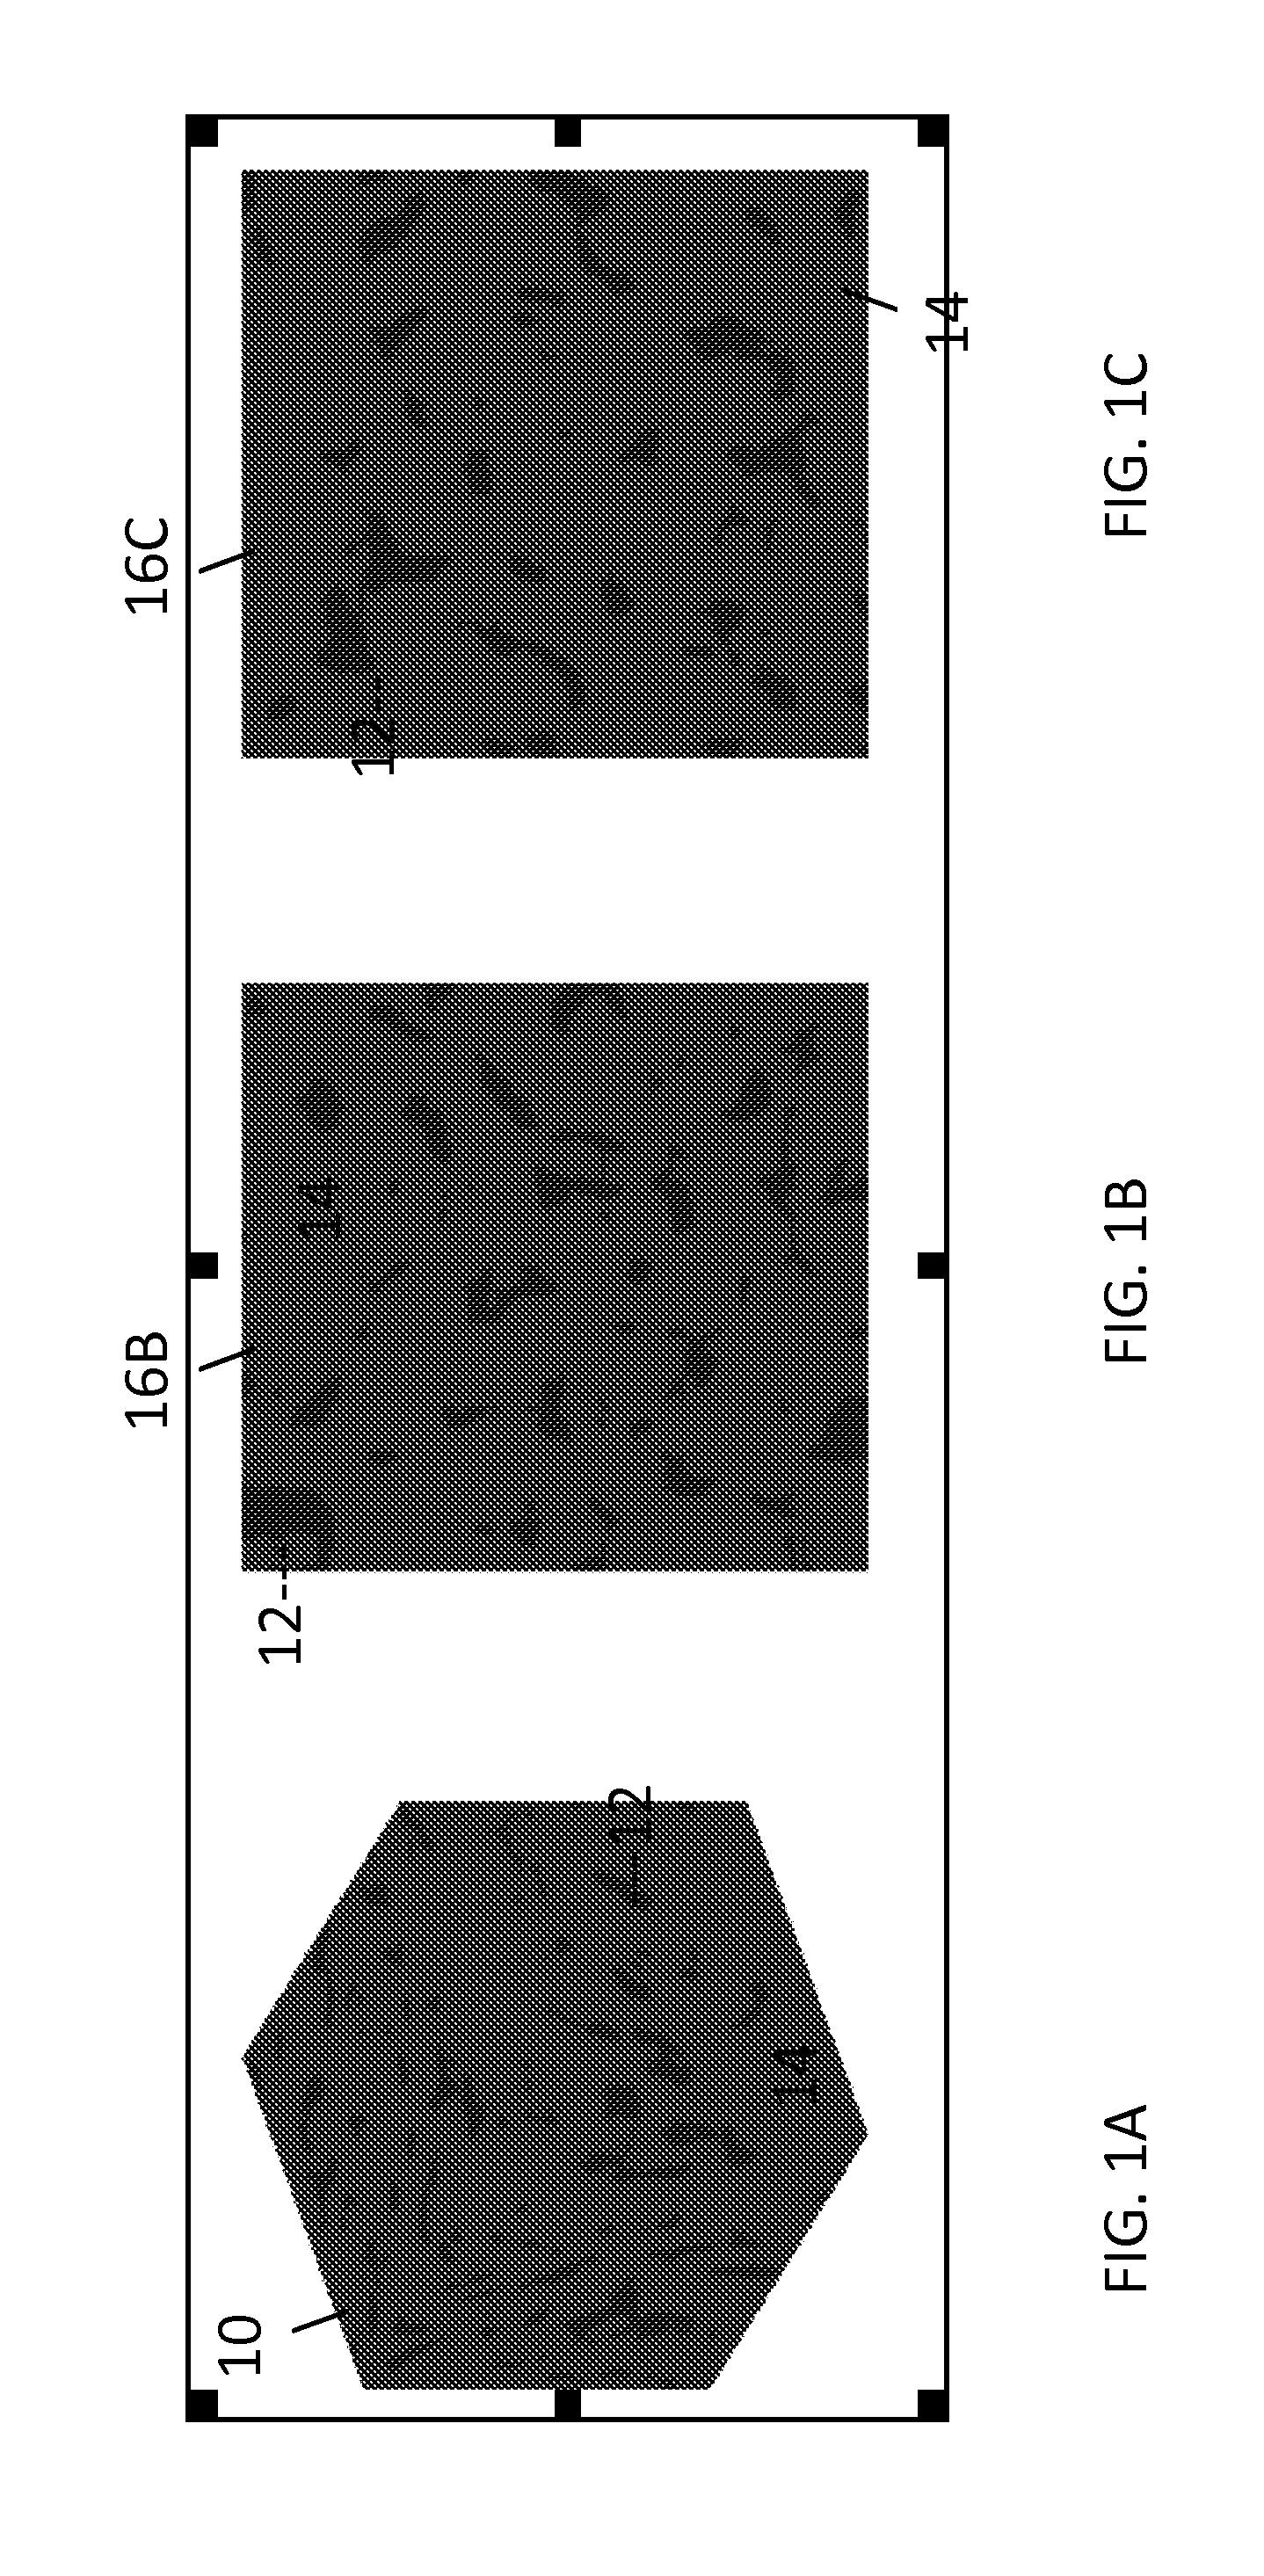 Method And System For Estimating Rock Properties From Rock Samples Using Digital Rock Physics Imaging